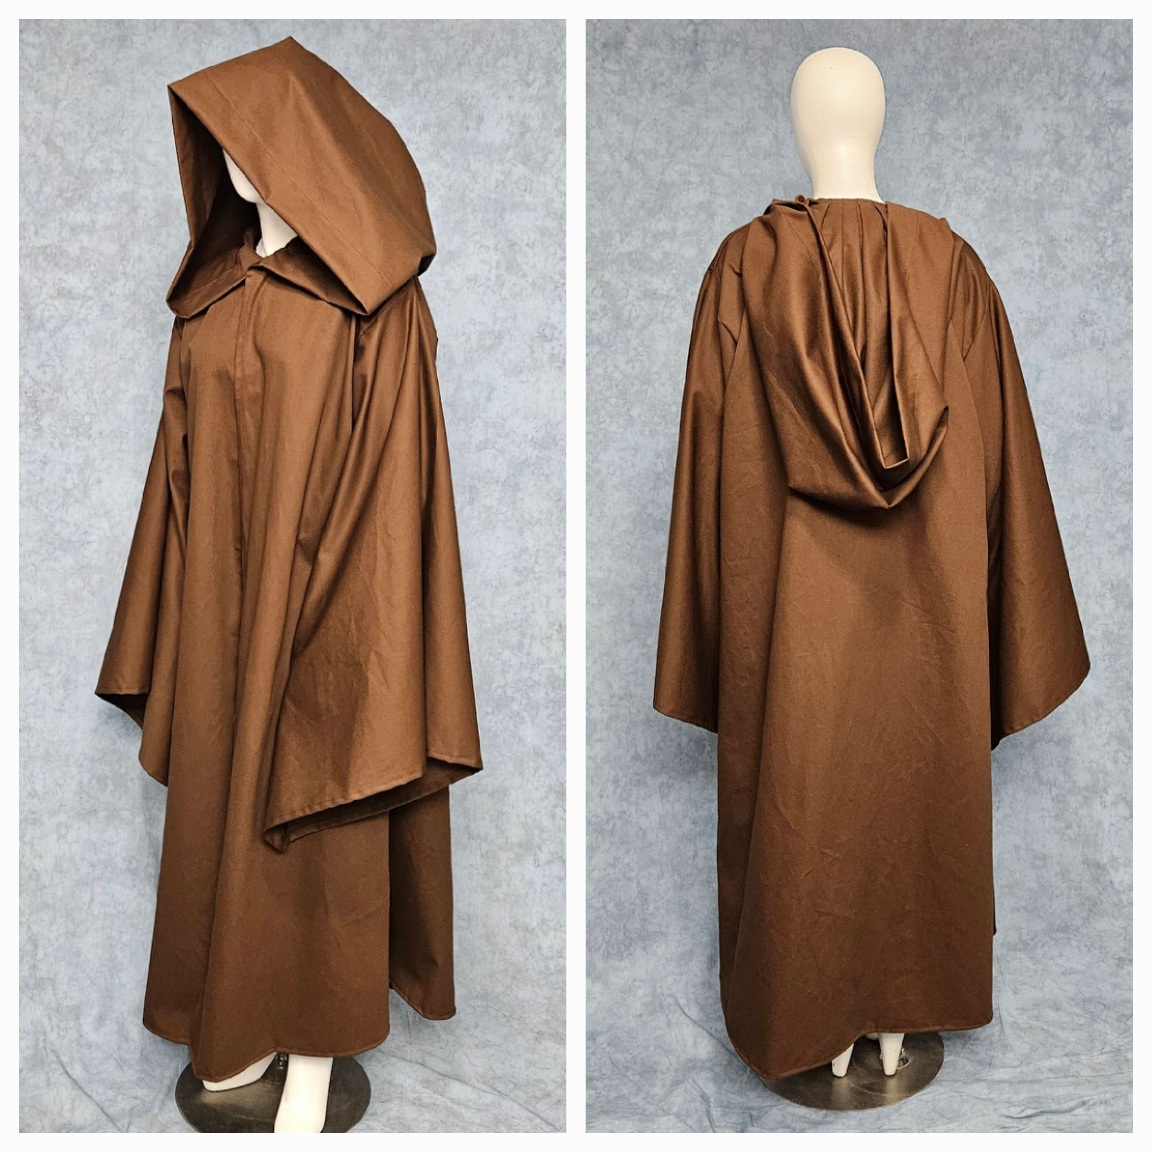 Jedi Robes - Twin Roses Designs